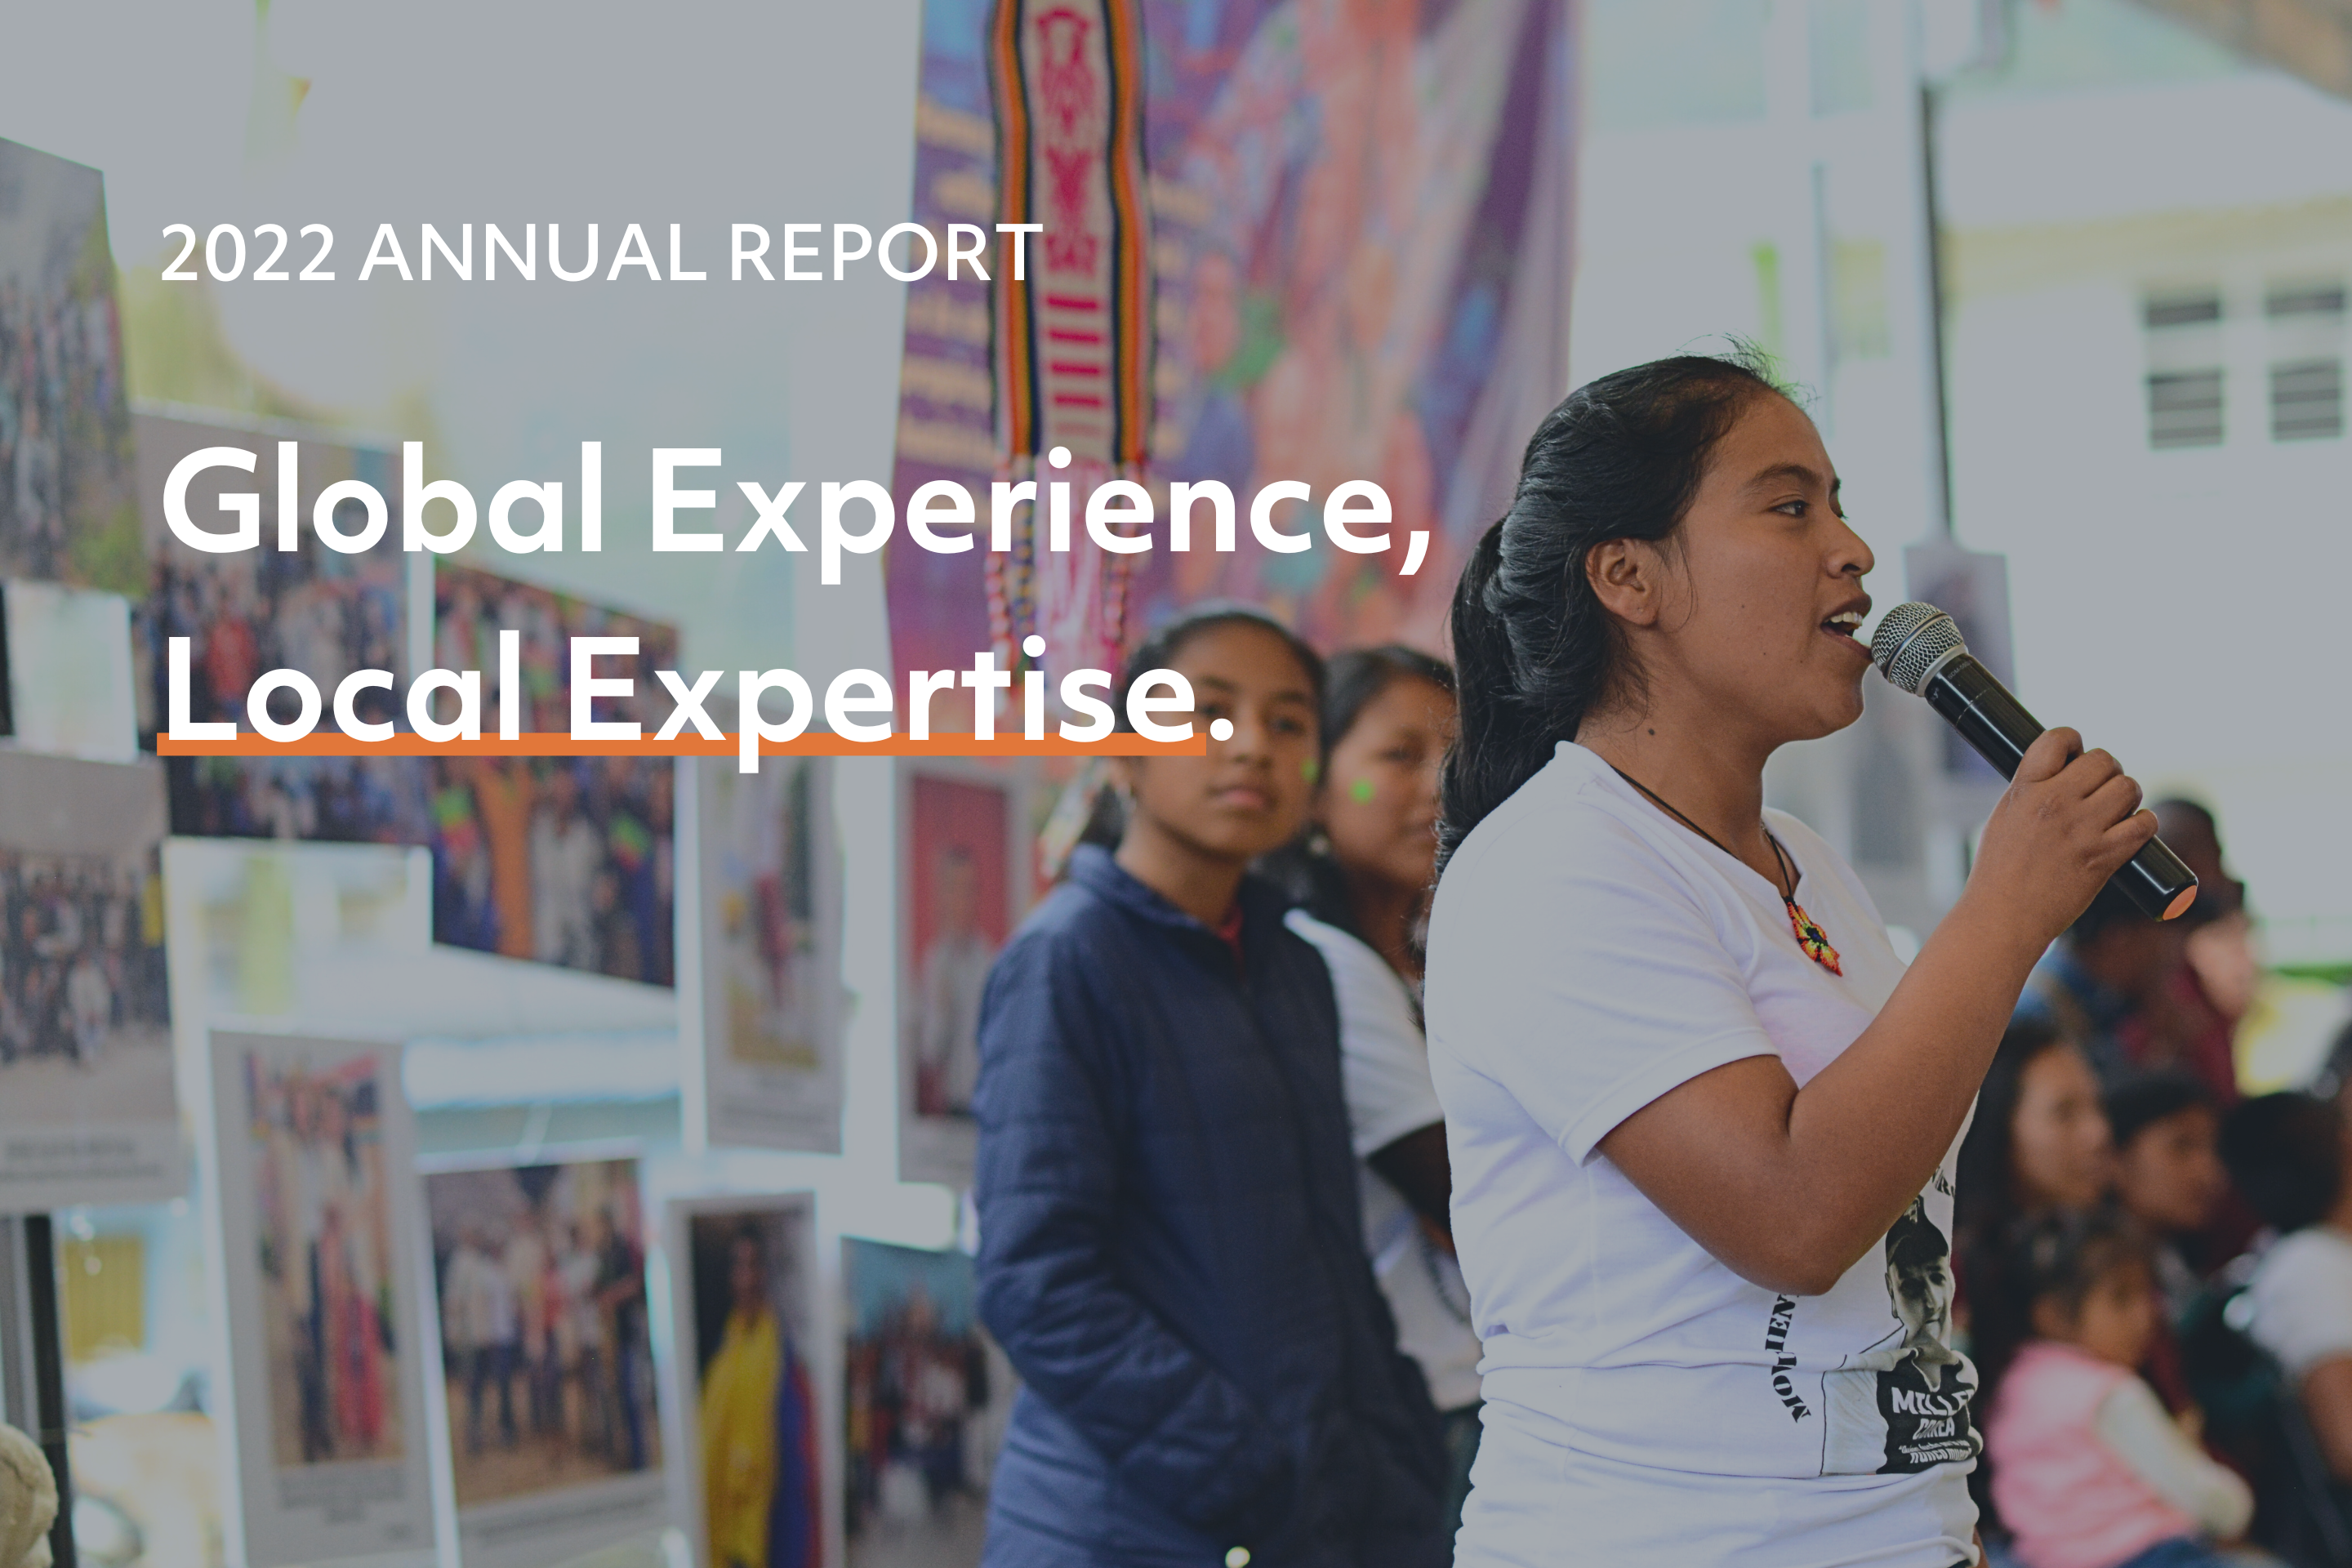 Read our 2022 Annual Report